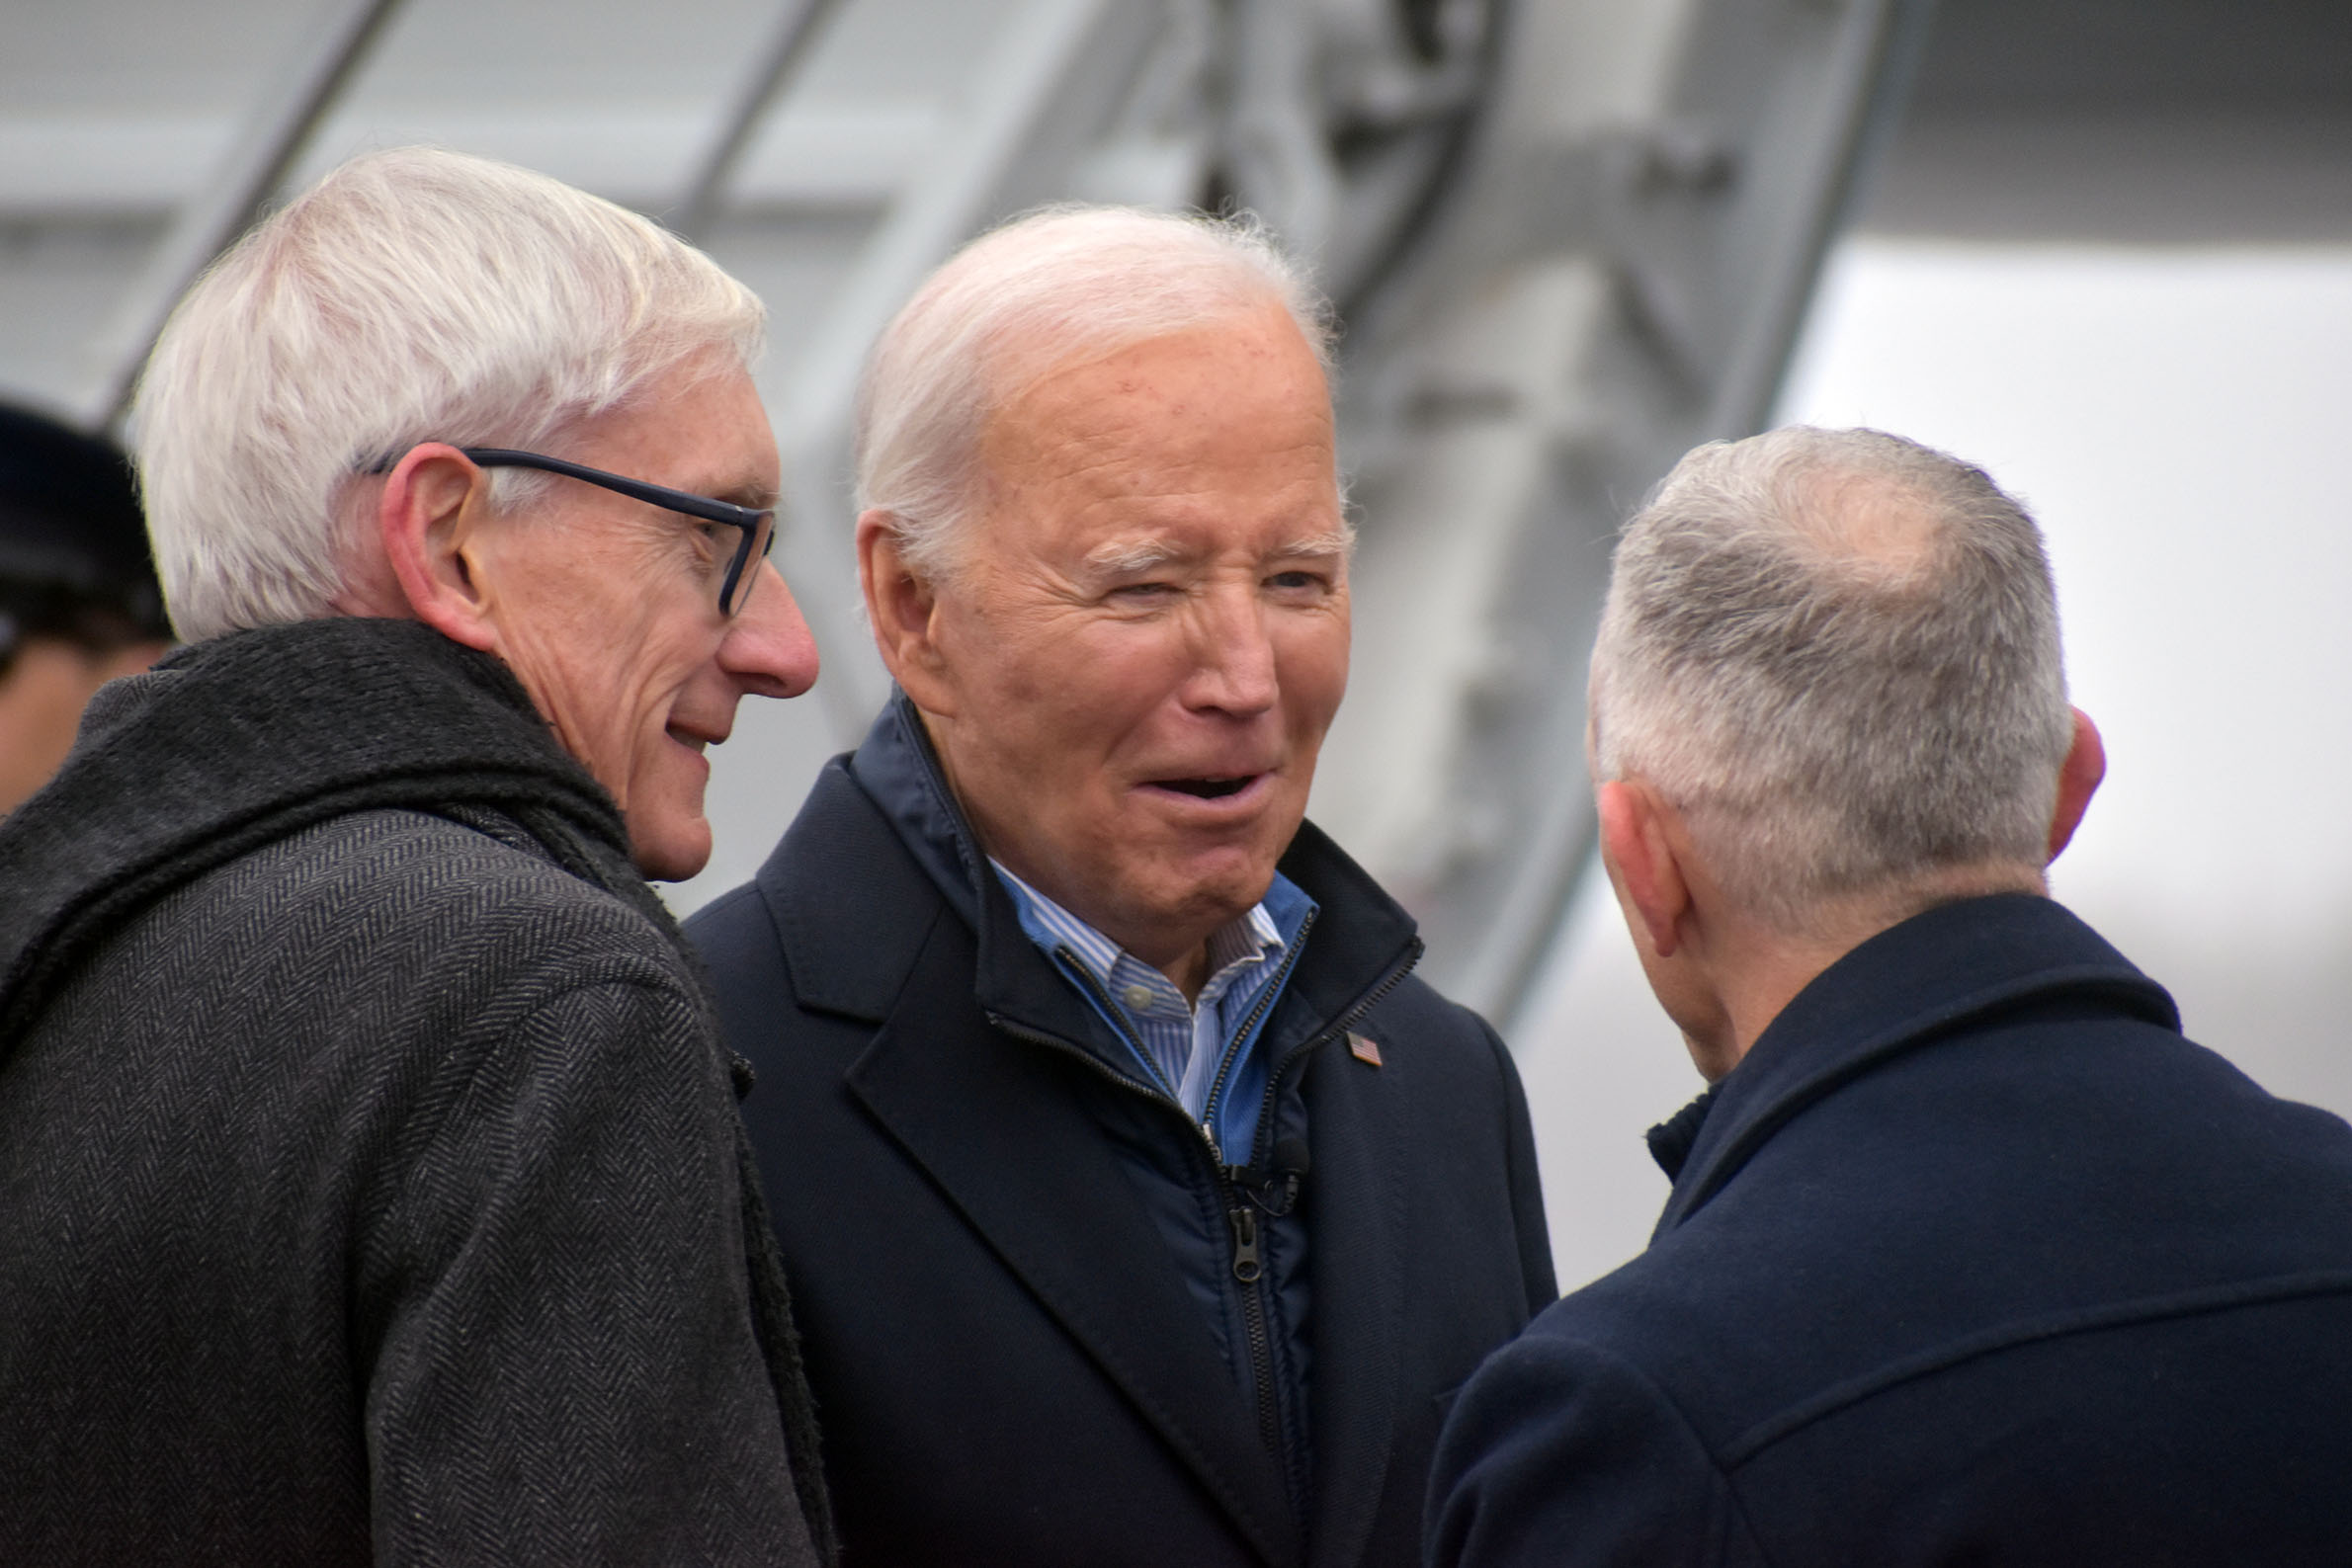 Ahead of State of the Union, Biden officials highlight ‘kitchen table issues’ for Wisconsin. Are voters listening?